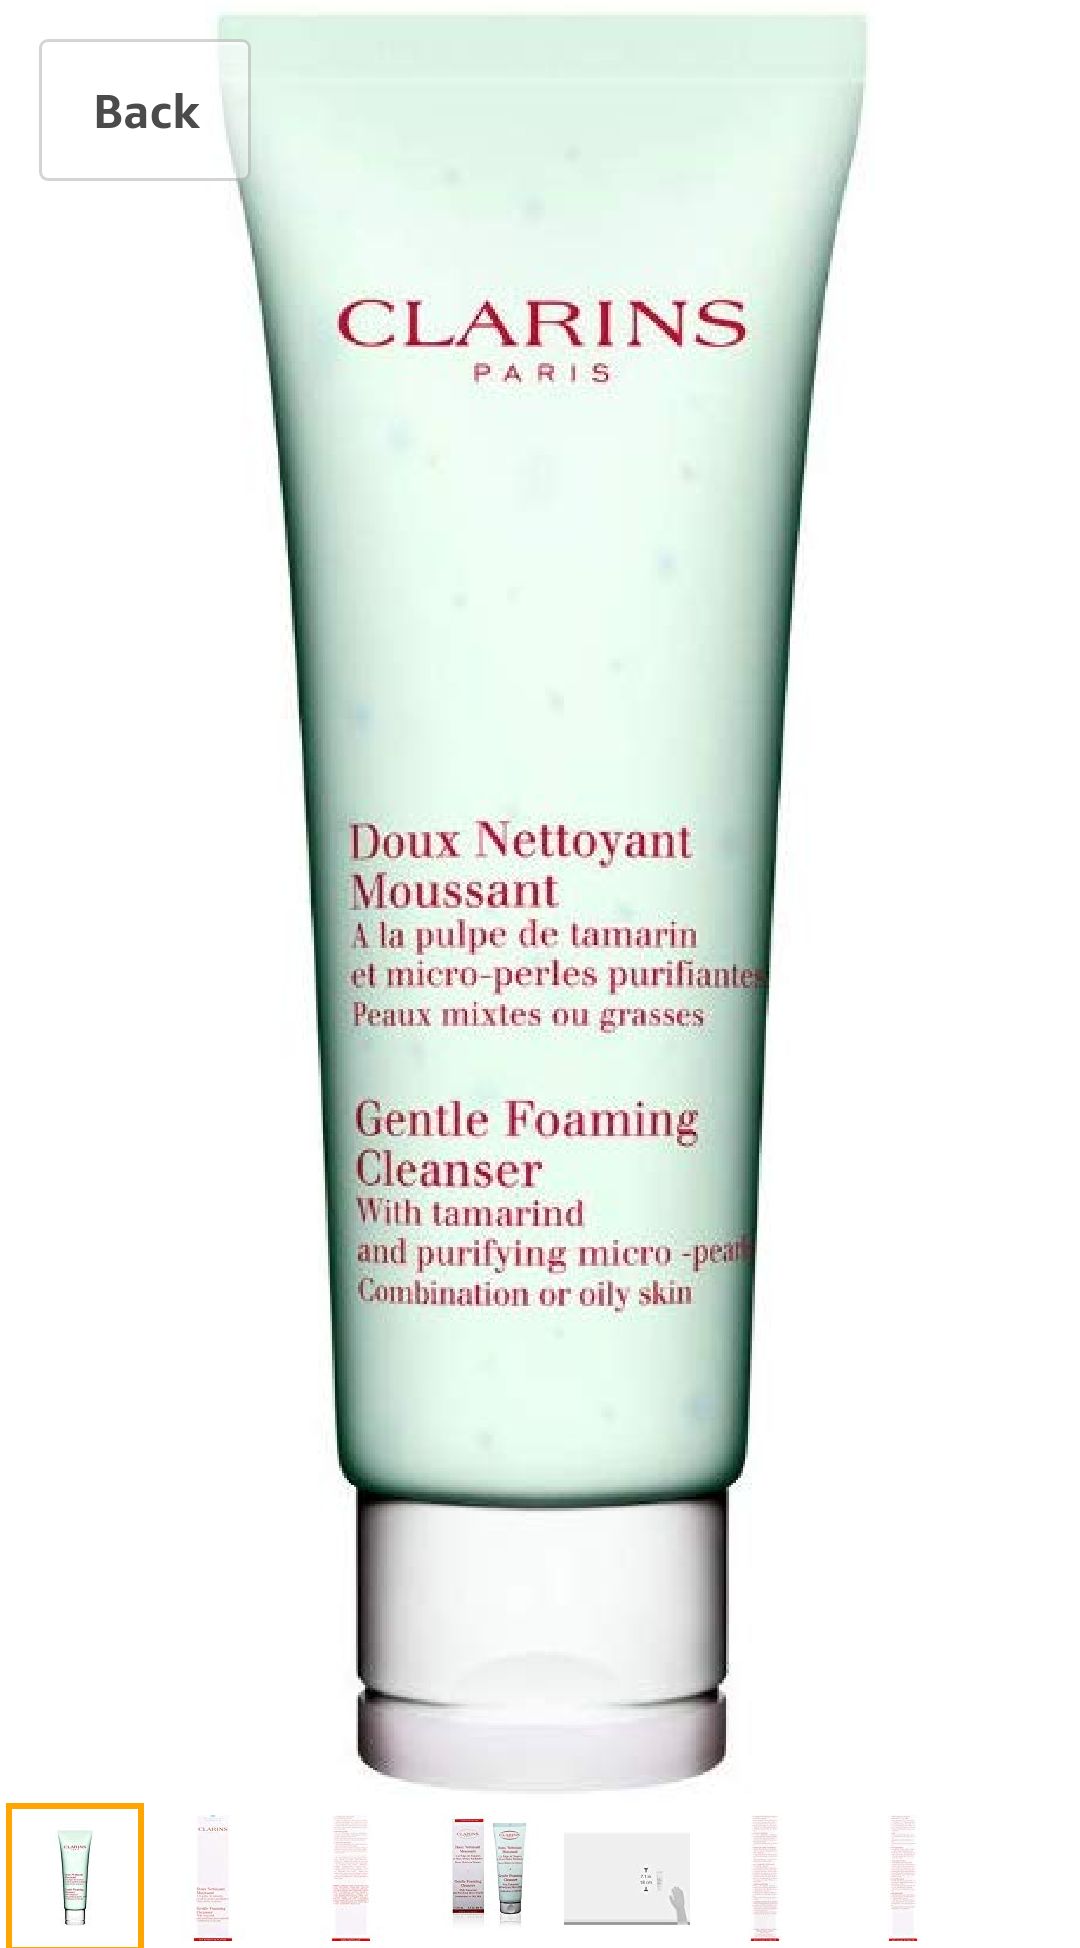 Amazon.com: Clarins Gentle Foaming Cleanser with Tamarind and Purifying Micro-Pearls | Facial Wash for Combination or Oily Skin 洗面奶